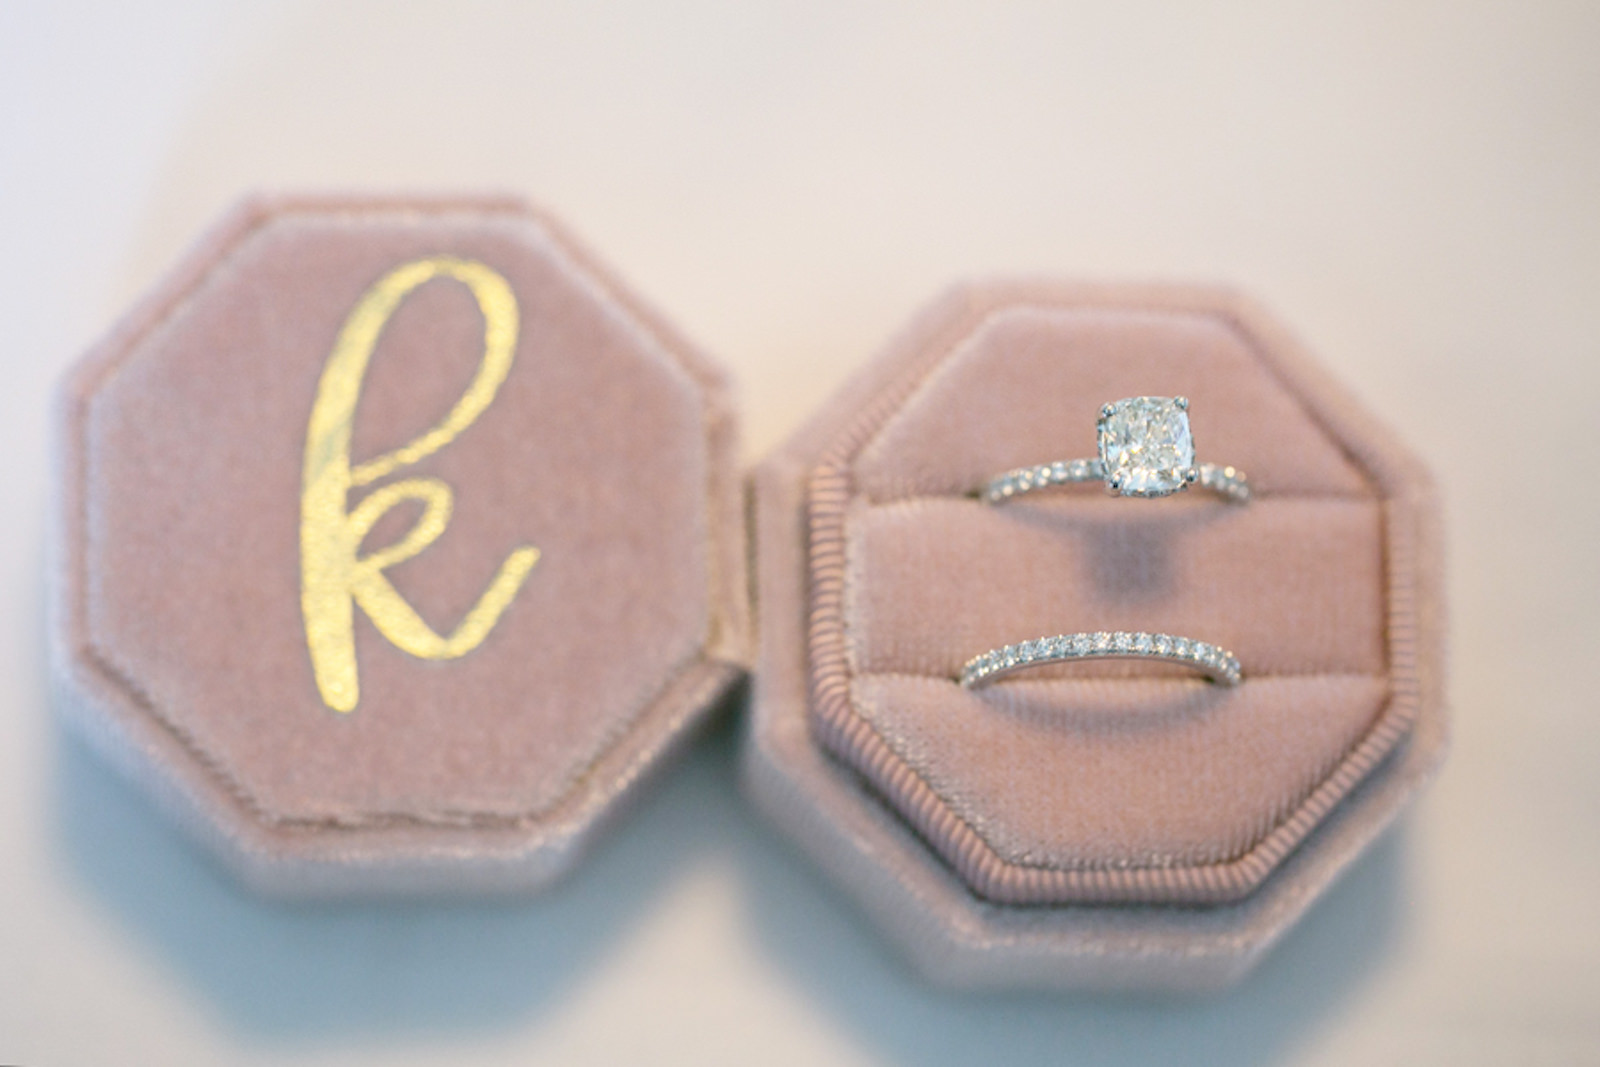 Wedding Ring Shot | Blush Pink Velvet Ring Box with Gold Monogram Initial | Channel Set Diamond Band with Square Cushion Cut Solitaire Diamond Engagement Ring